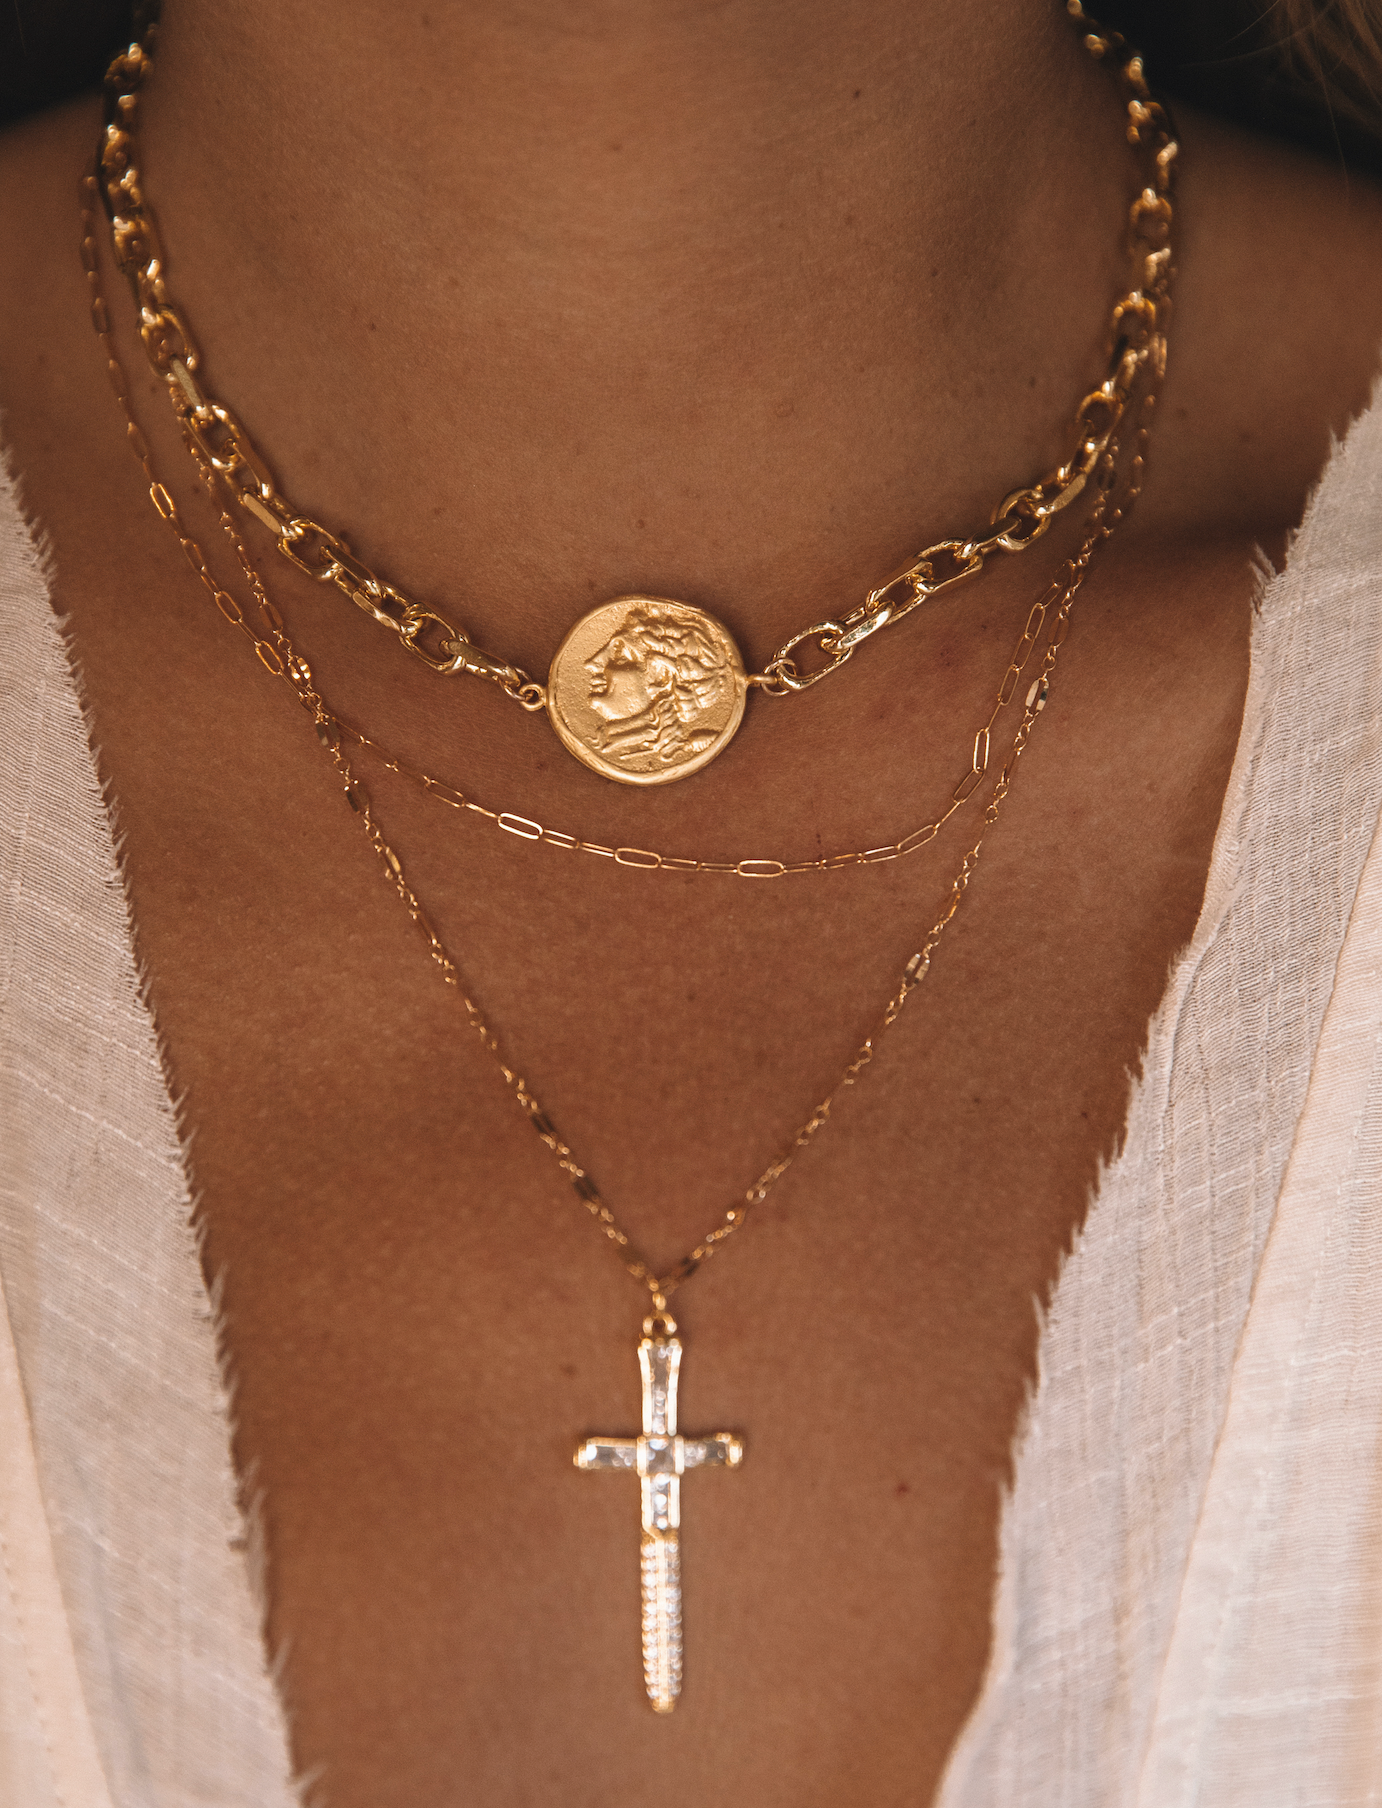 The Greek Coin Necklace